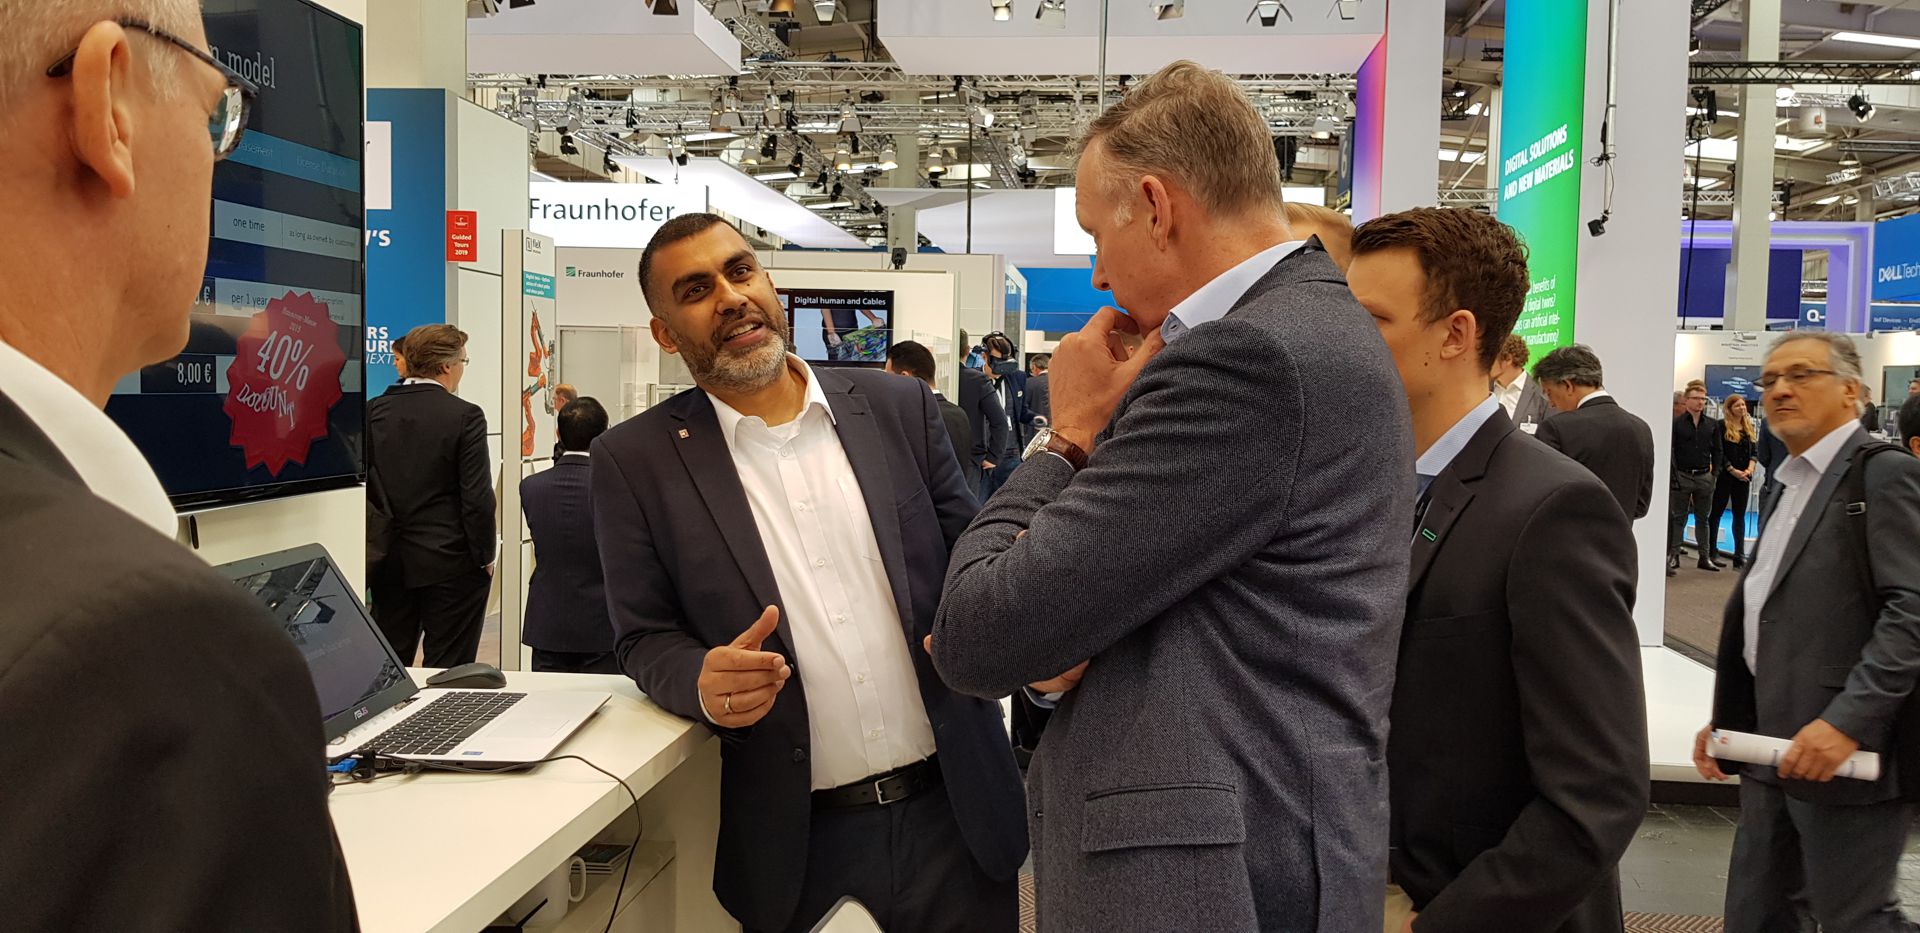 Hannover Exhibition 2019